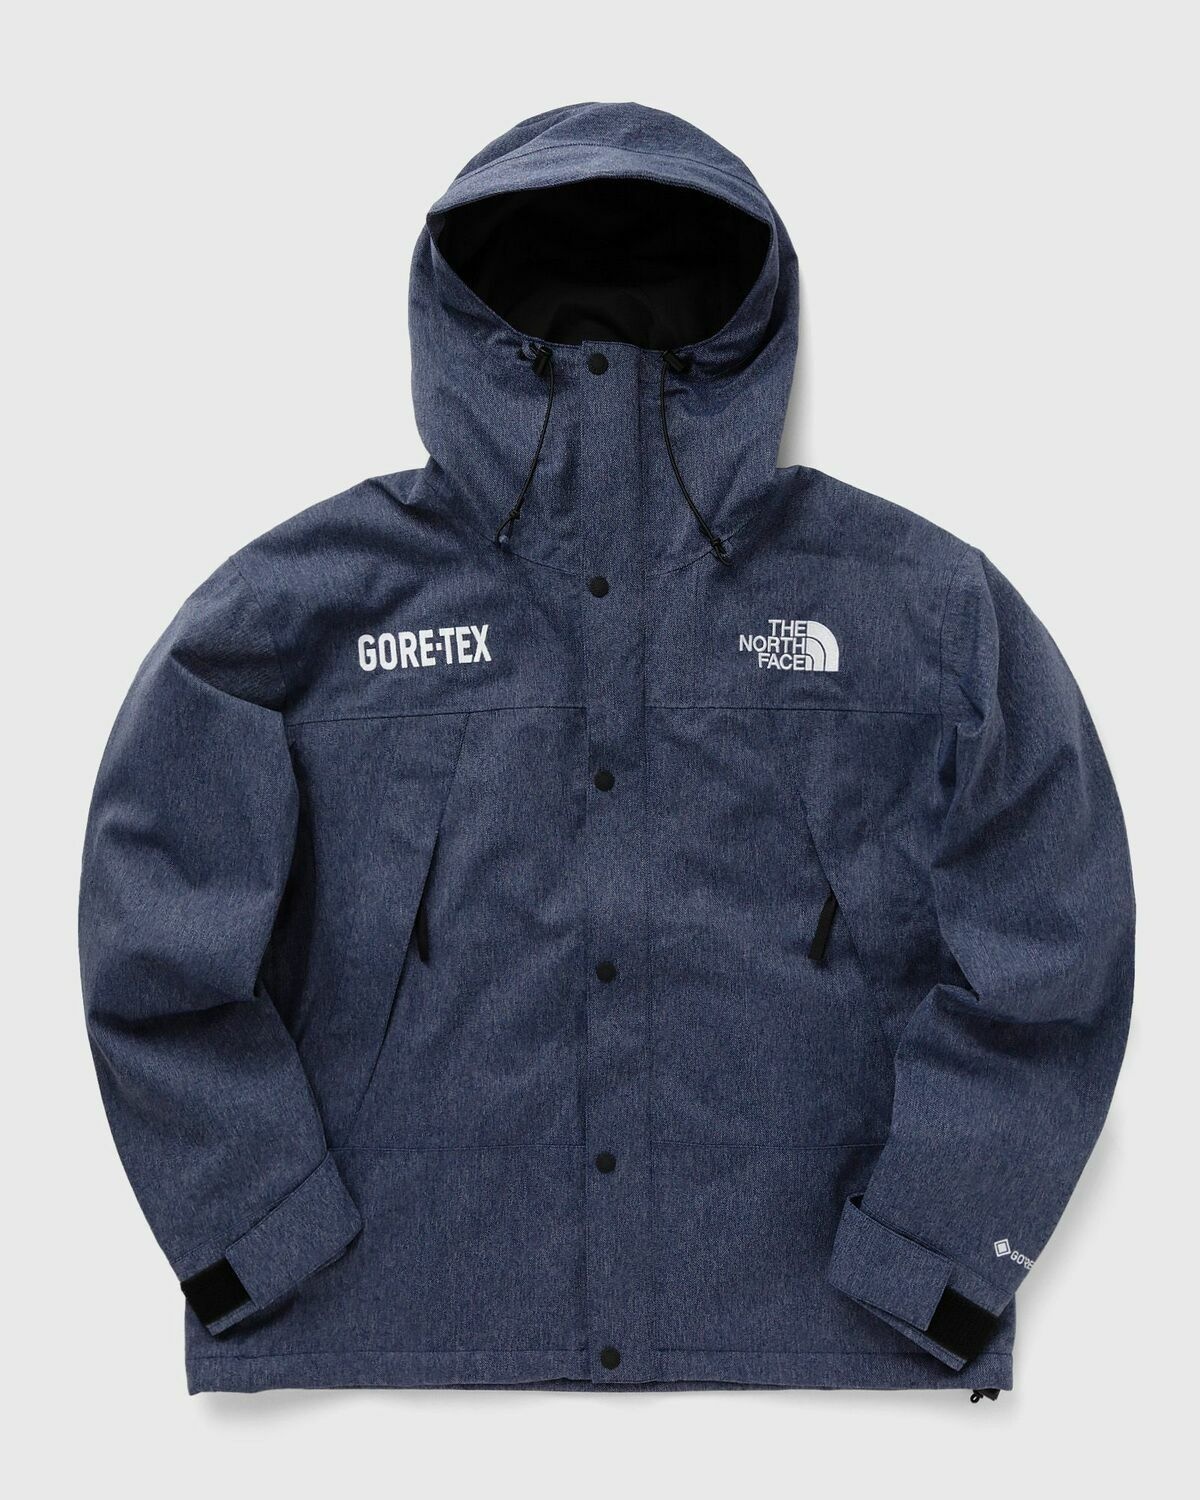 The North Face Gtx Mtn Jacket Blue - Mens - Shell Jackets The